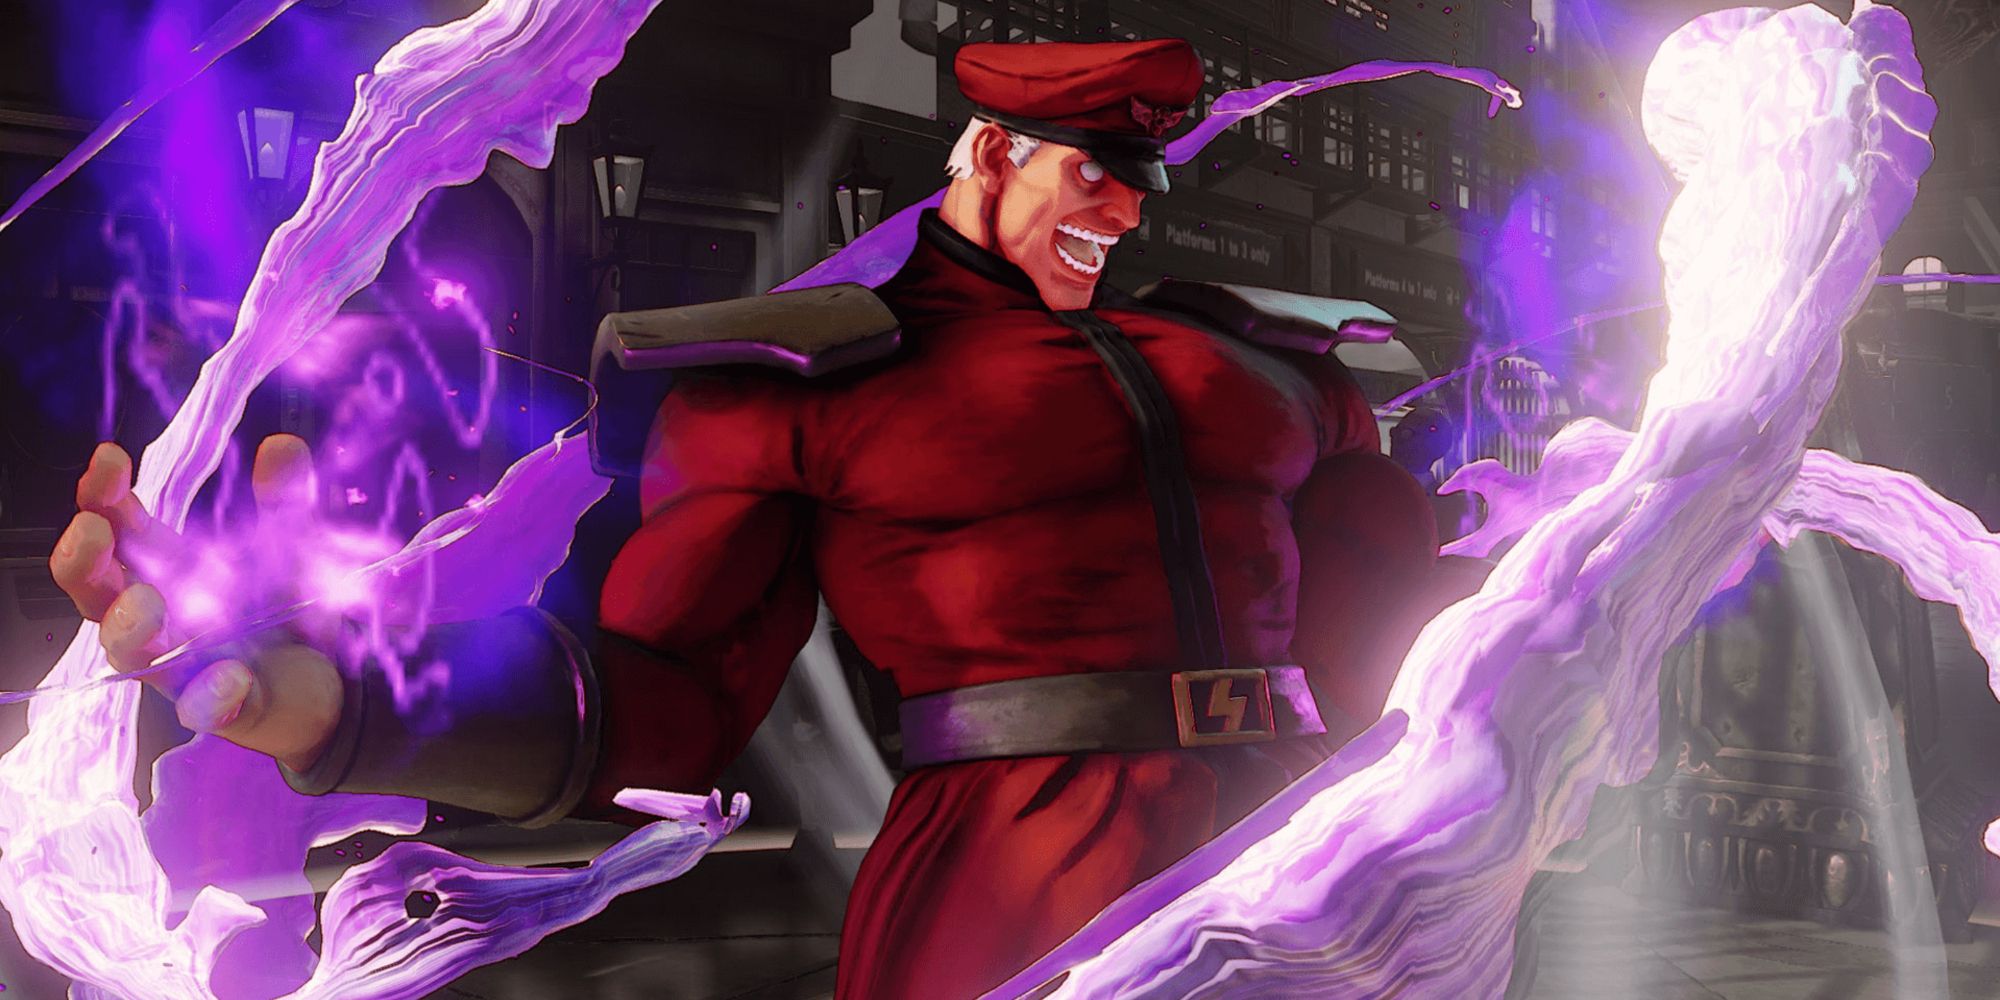 M. Bison Surrounded By Purple Energy